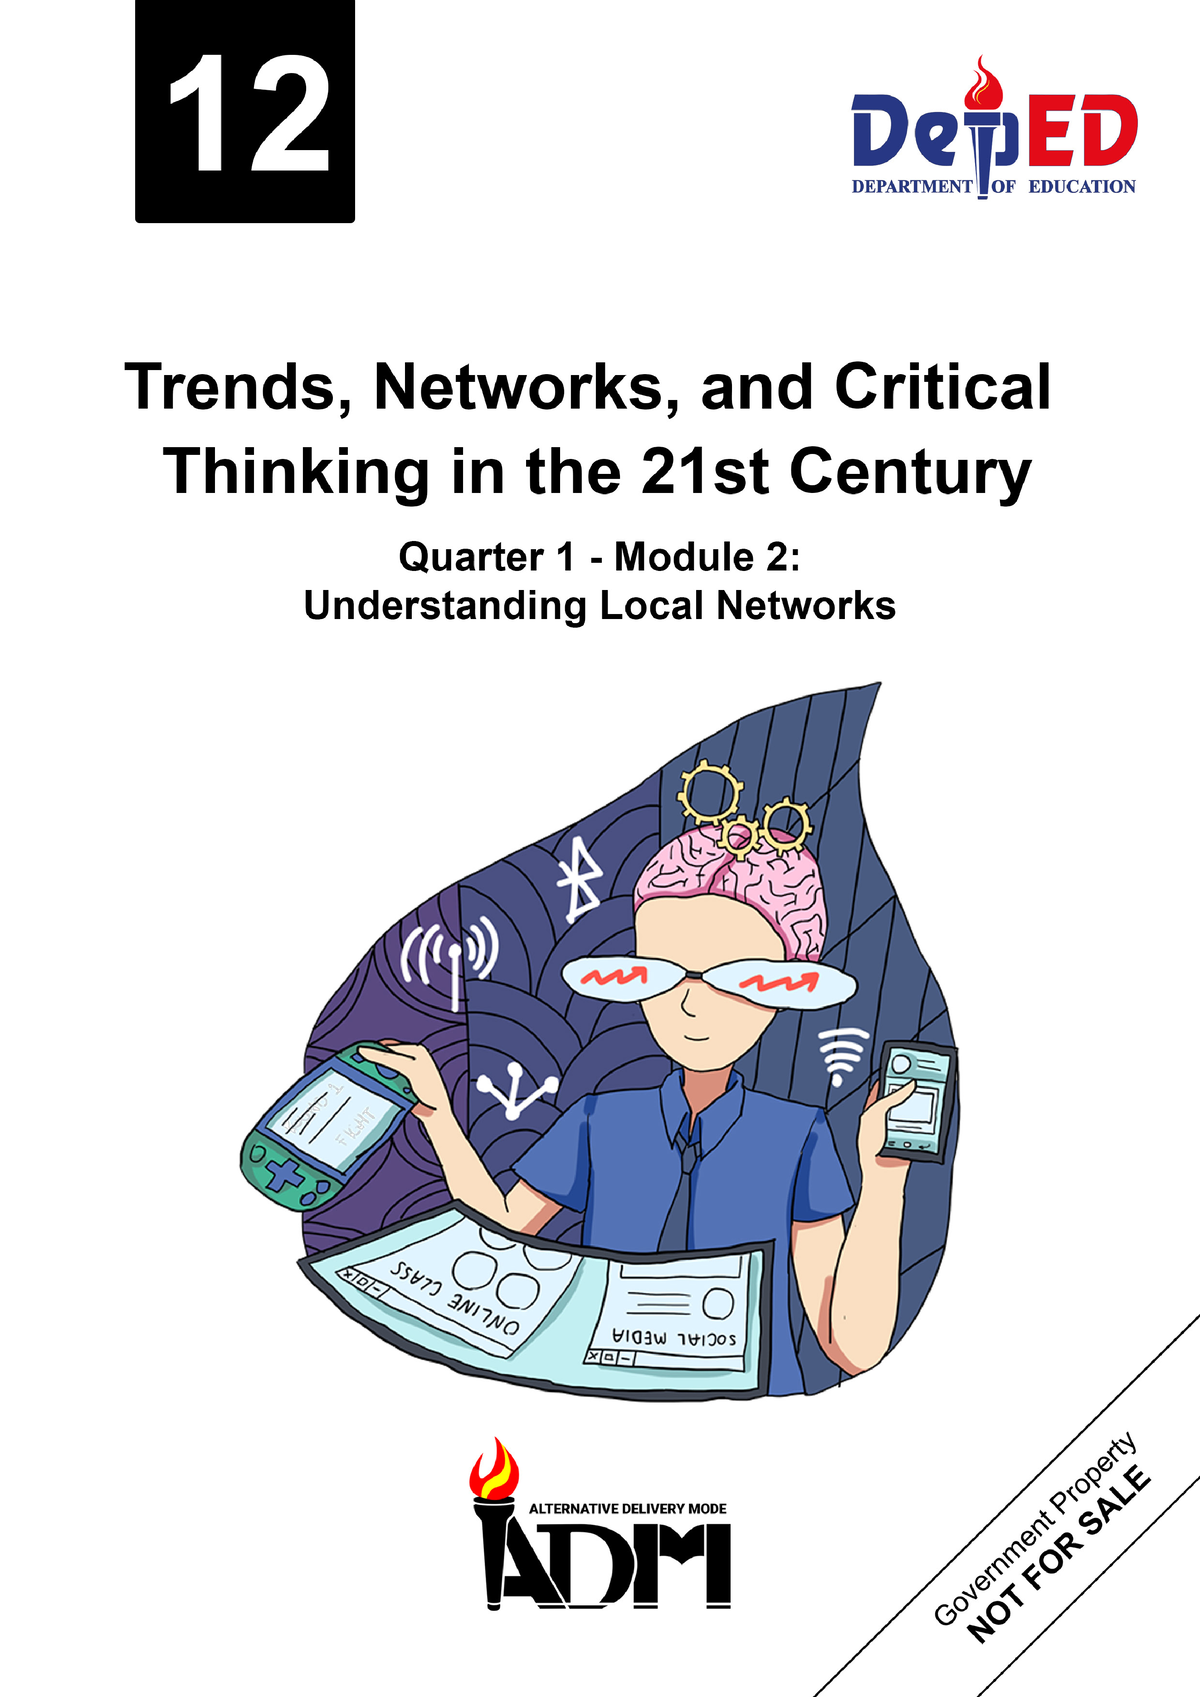 learning activity sheets in trends networks and critical thinking